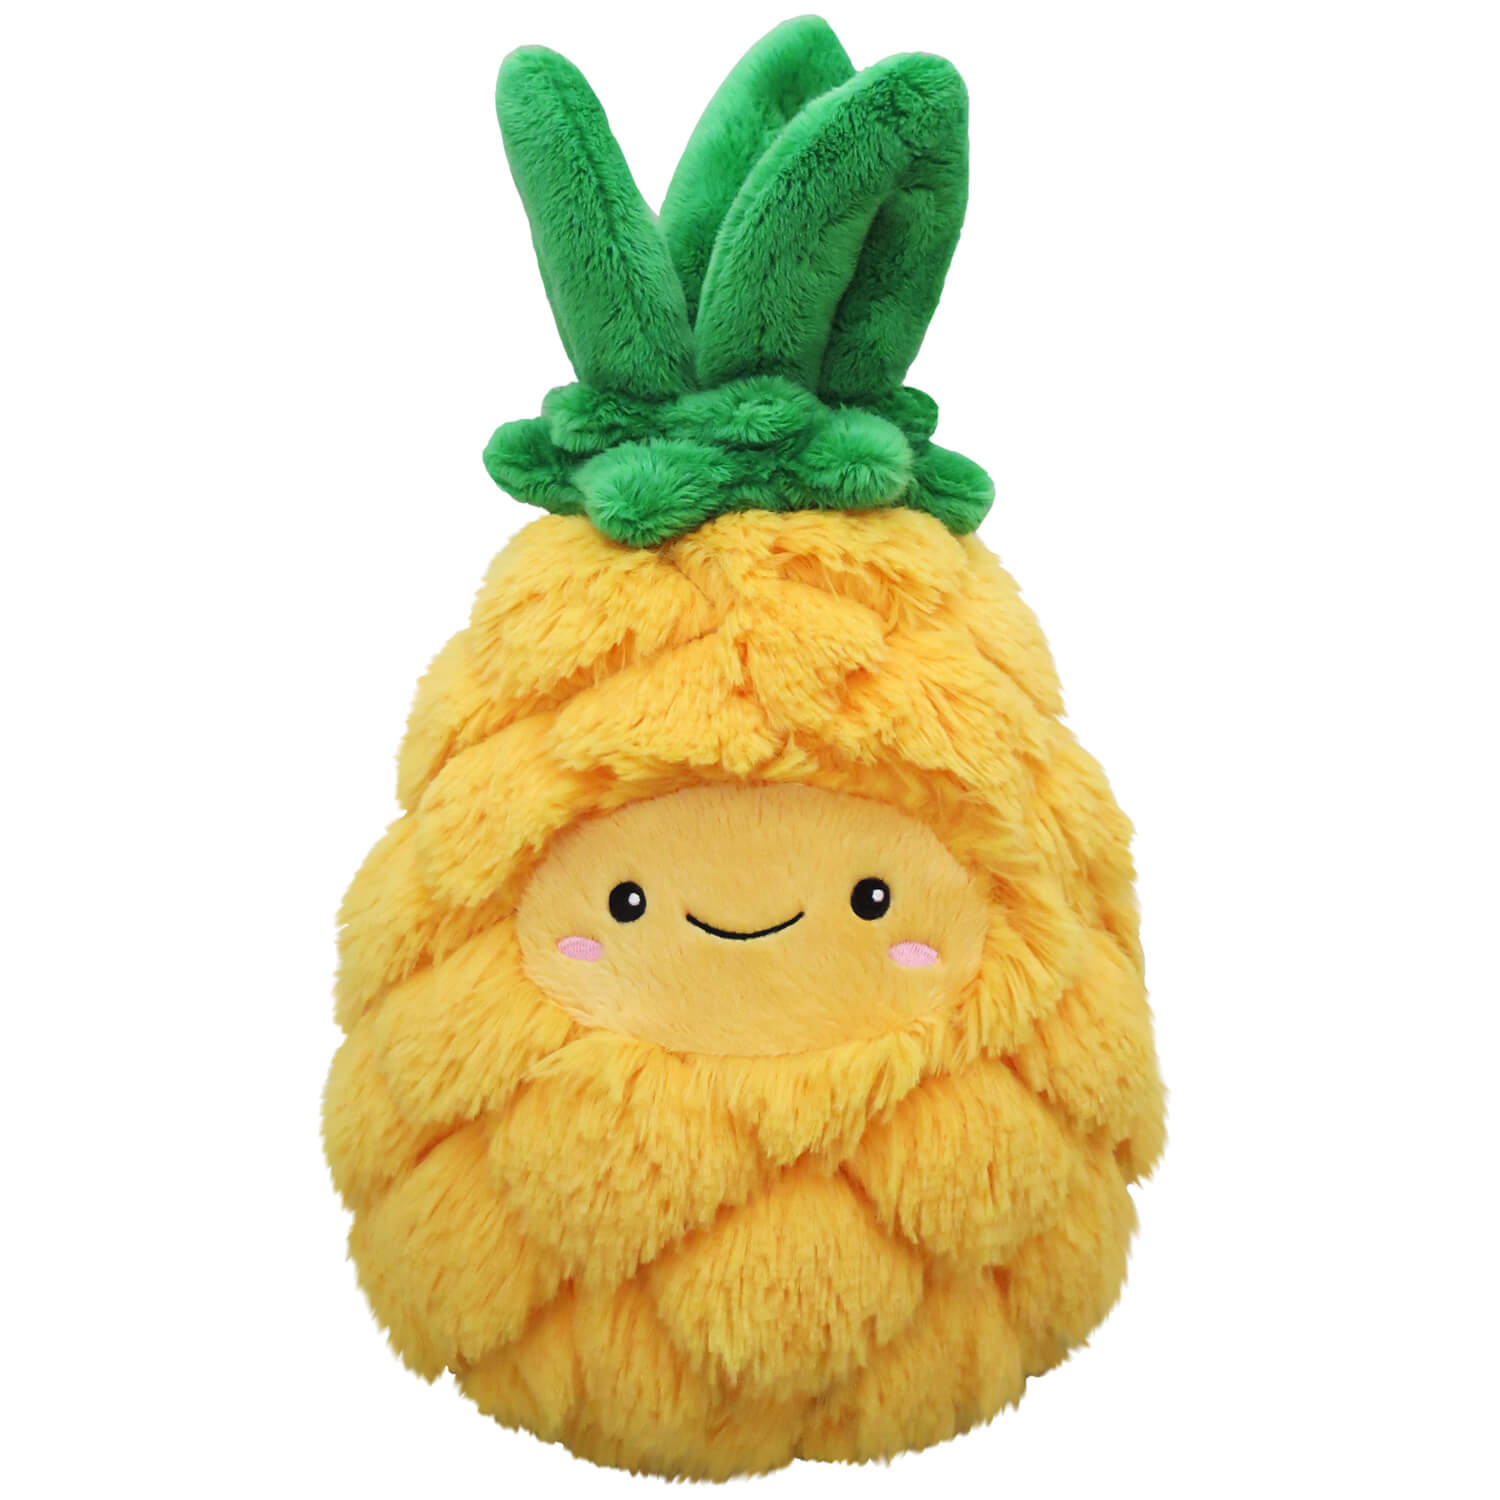 Squishables Comfort Food Mini Pineapple plush is yellow with a green top and smiley face.